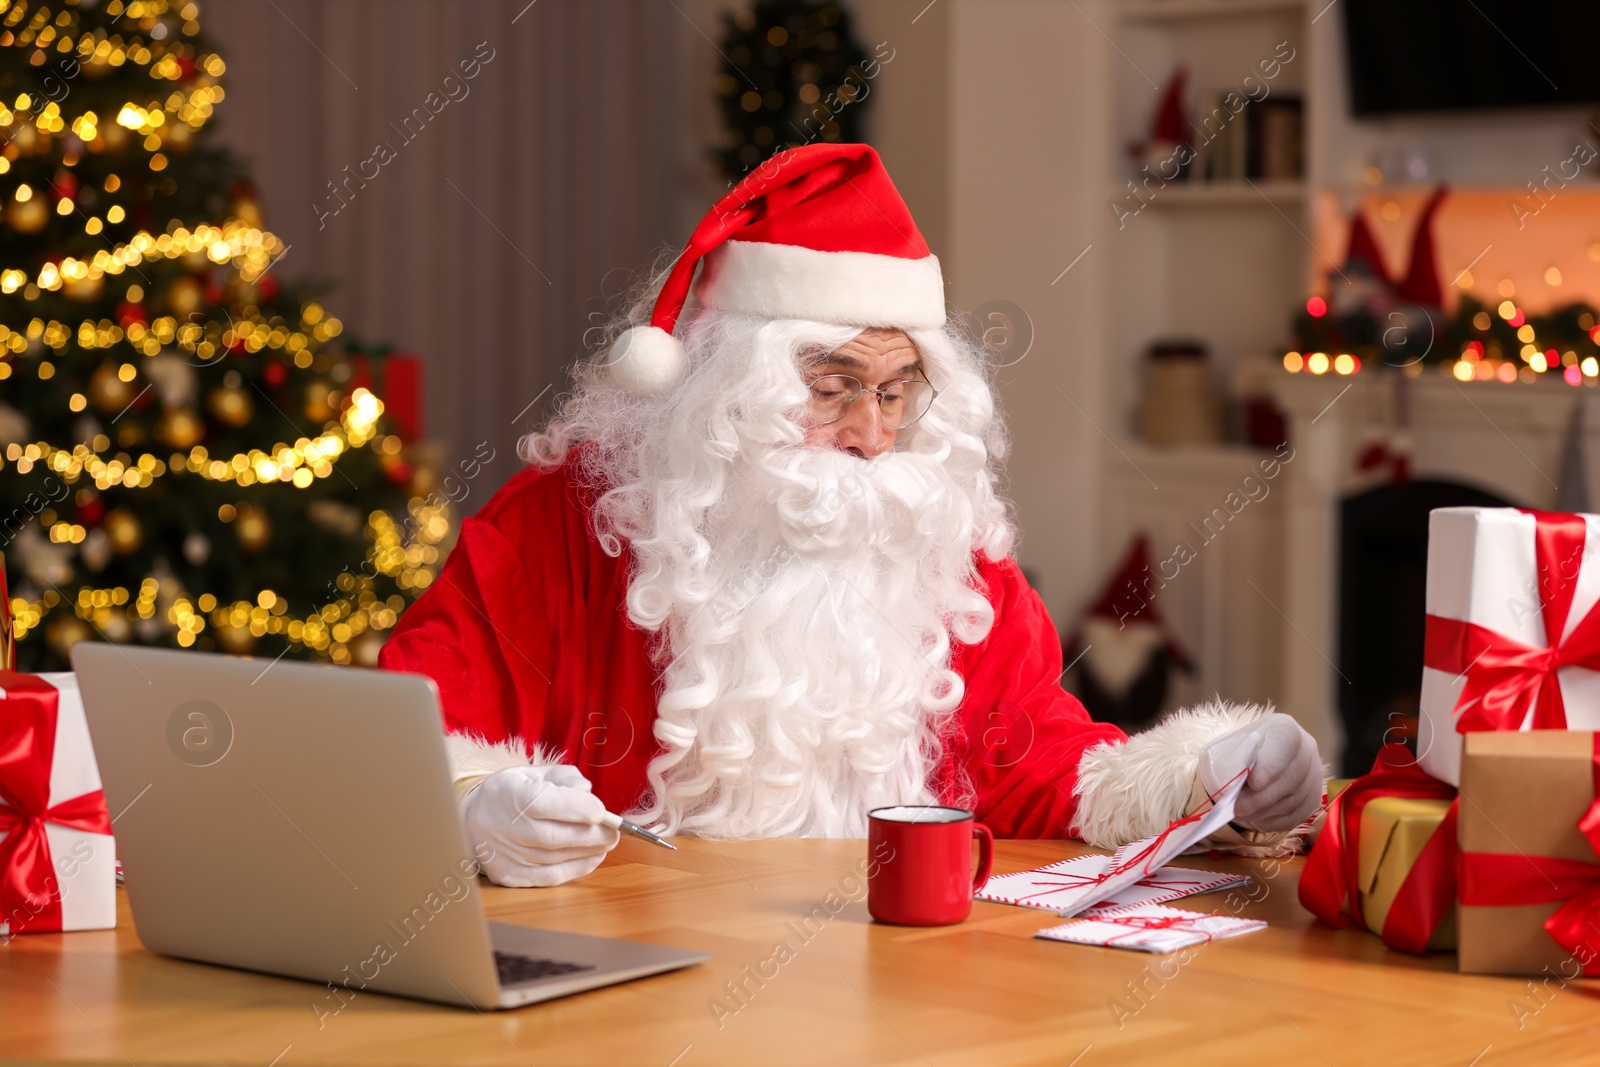 Photo of Santa Claus reading Christmas letters at table in room